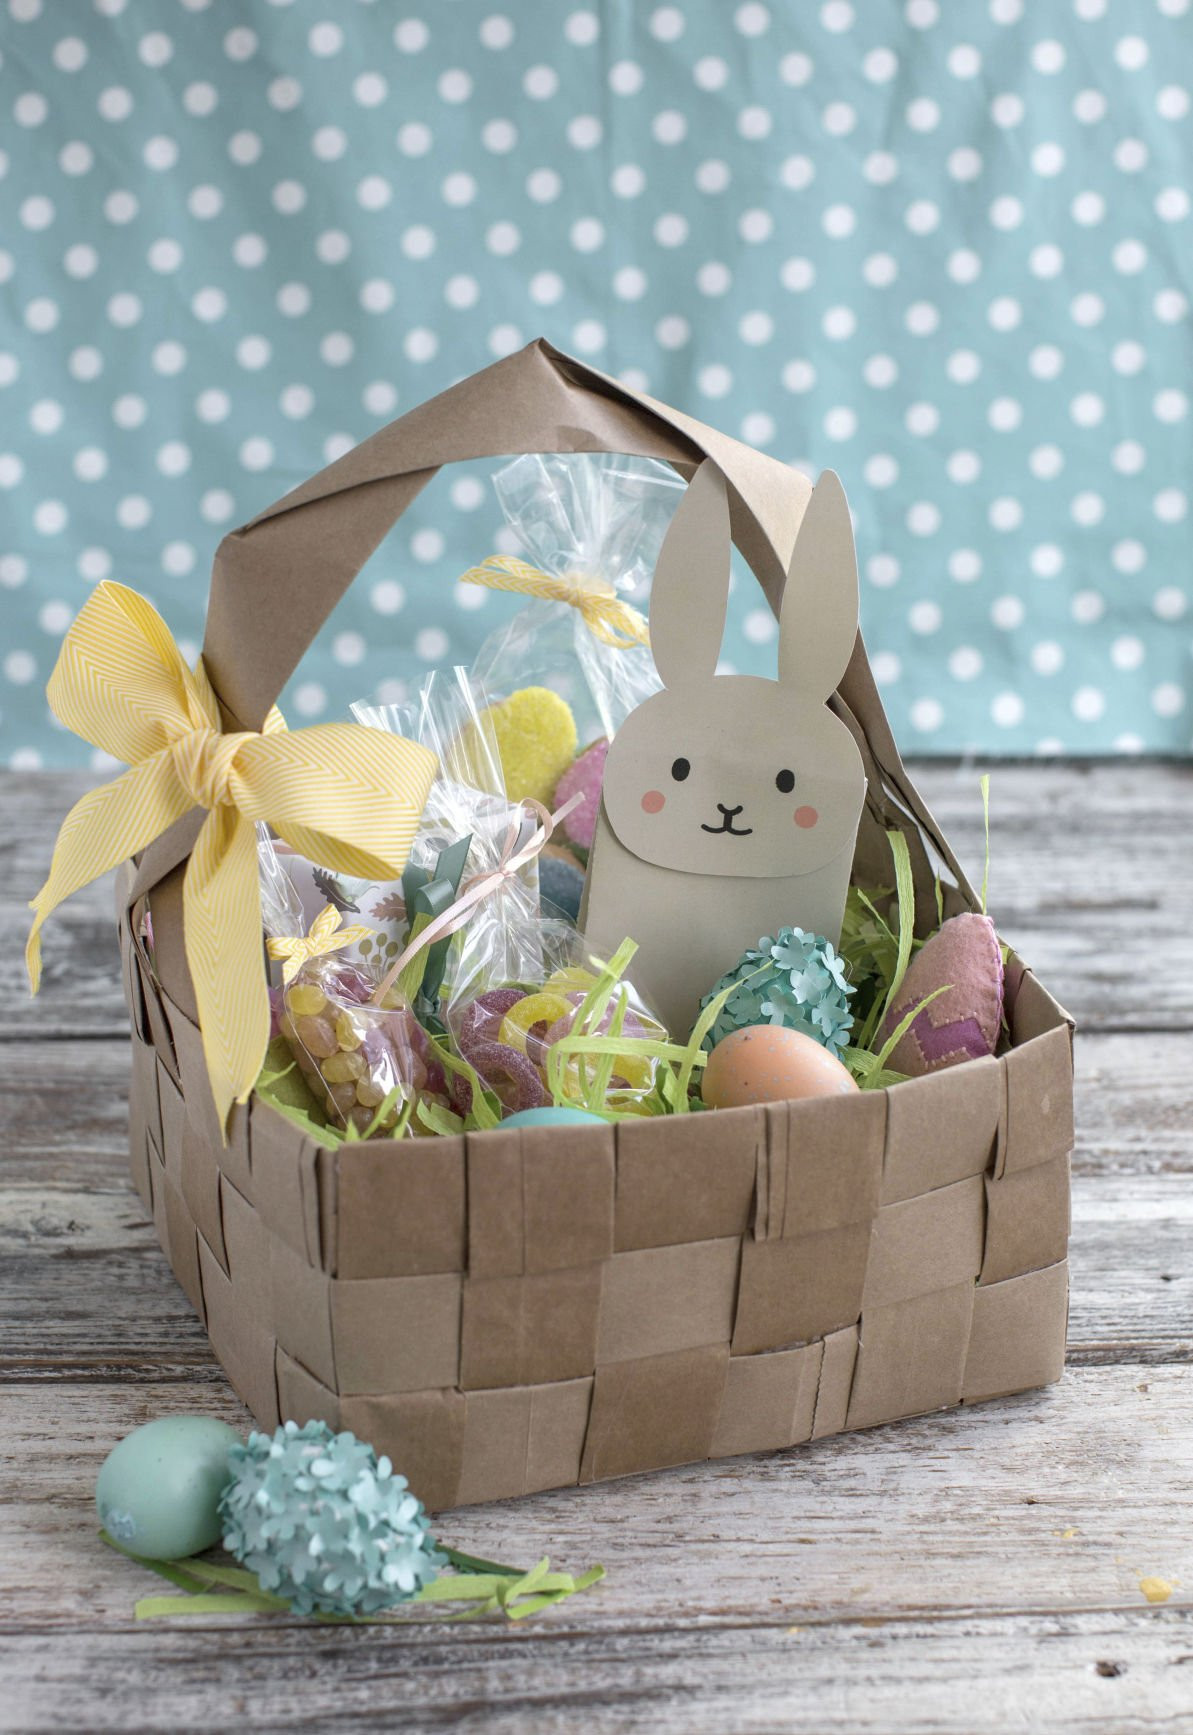 Diy For Easter
 Hop to it 5 ways to creative with Easter baskets